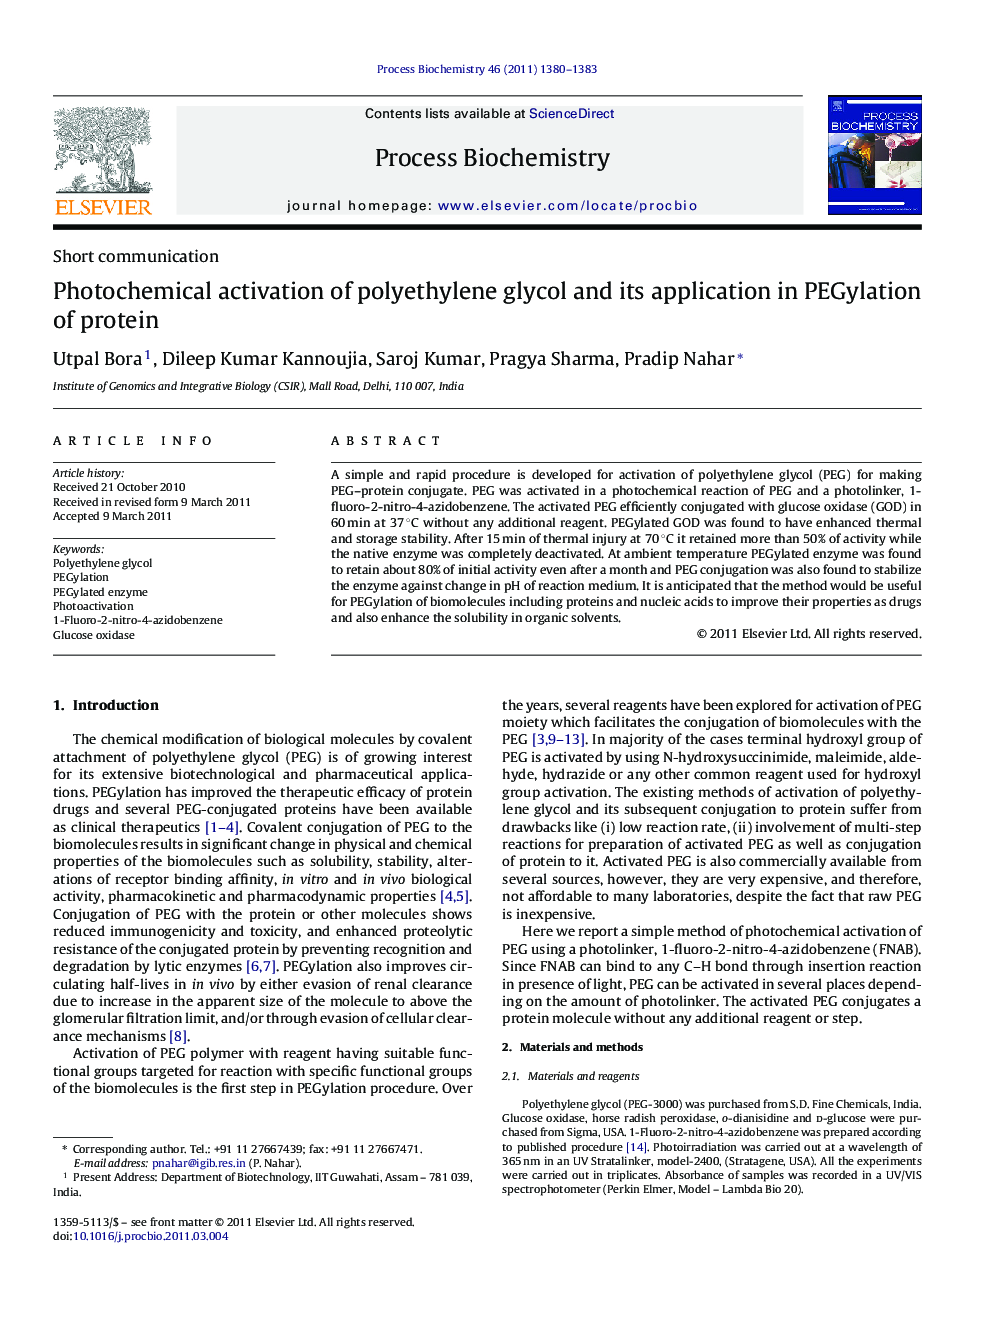 Photochemical activation of polyethylene glycol and its application in PEGylation of protein